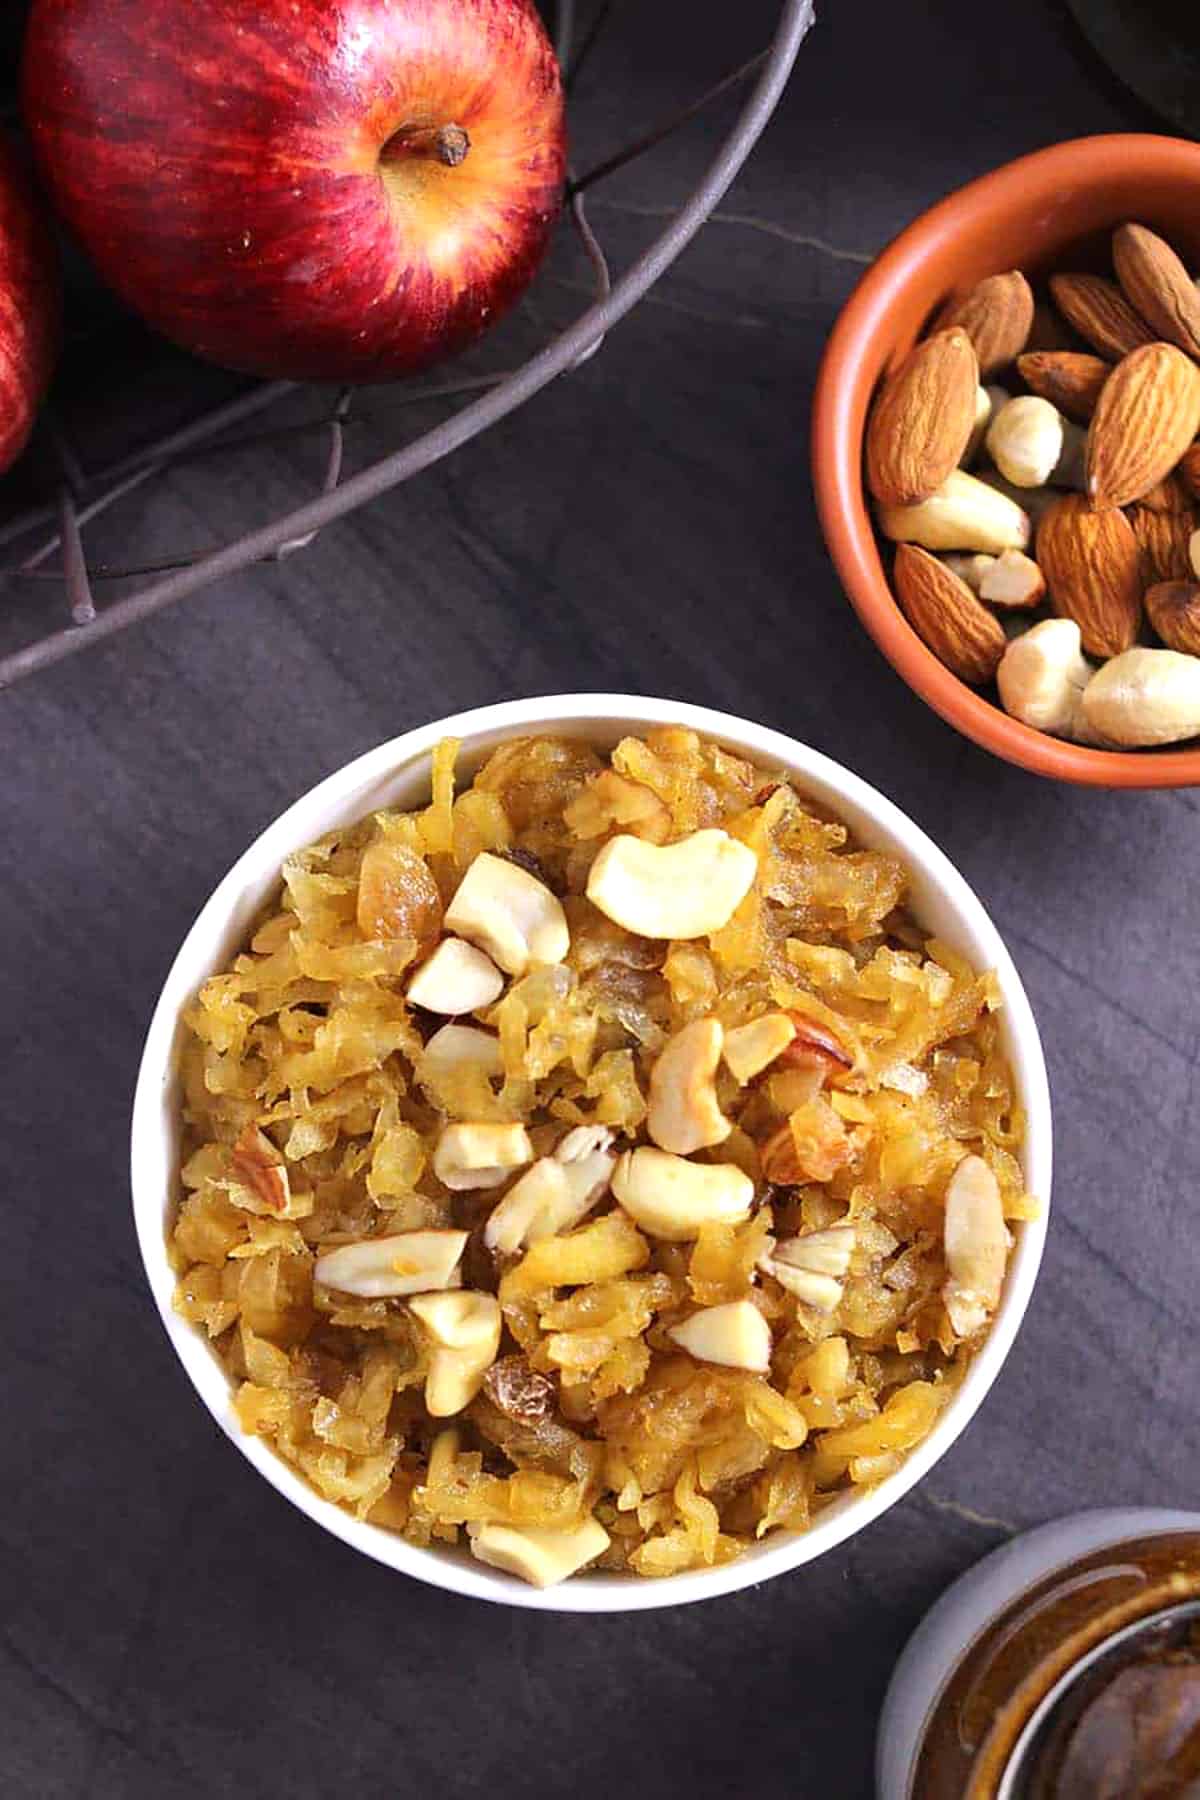 Apple Pudding or Apple Halwa Sweet (No eggs, no milk, gluten free and made without oven. )